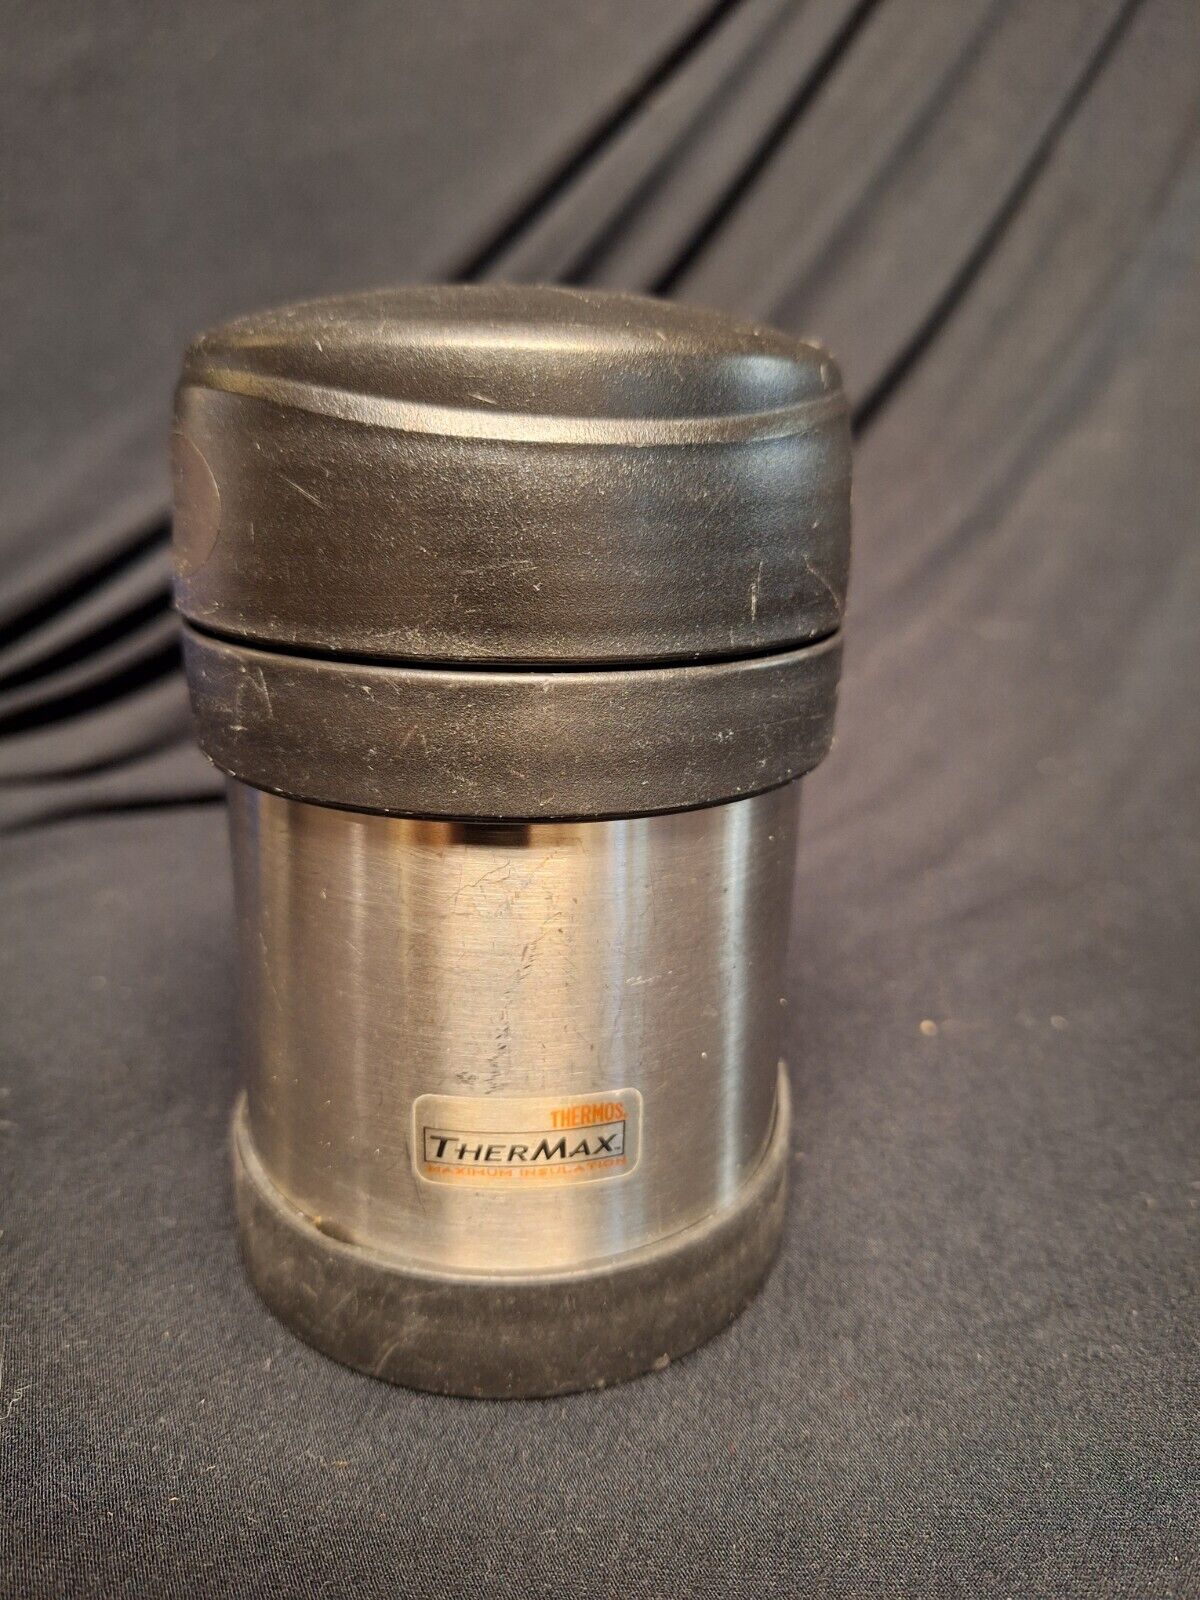 Thermos Thermax 10 oz. Vacuum Insulated Stainless Steel Food/Drink Thermos